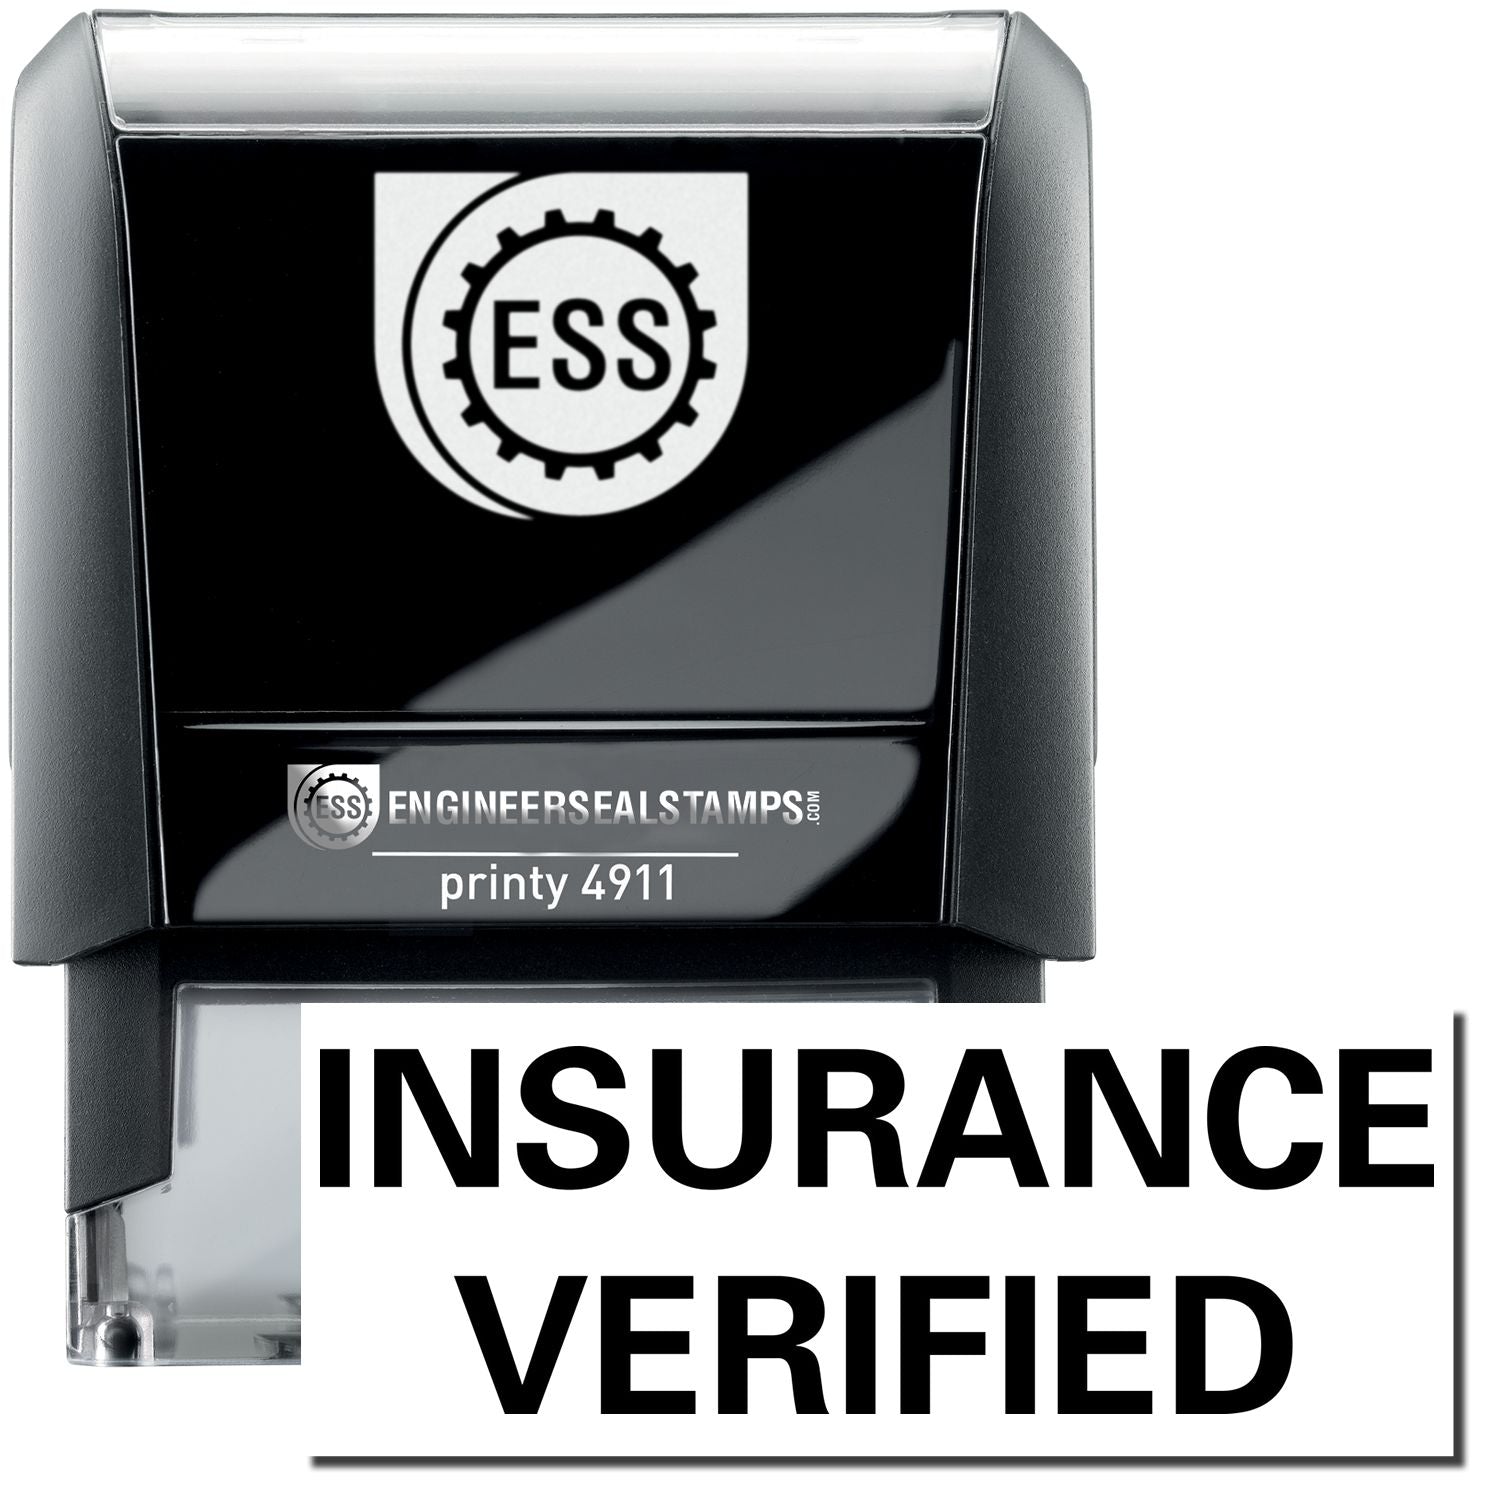 A self-inking stamp with a stamped image showing how the text "INSURANCE VERIFIED" is displayed after stamping.